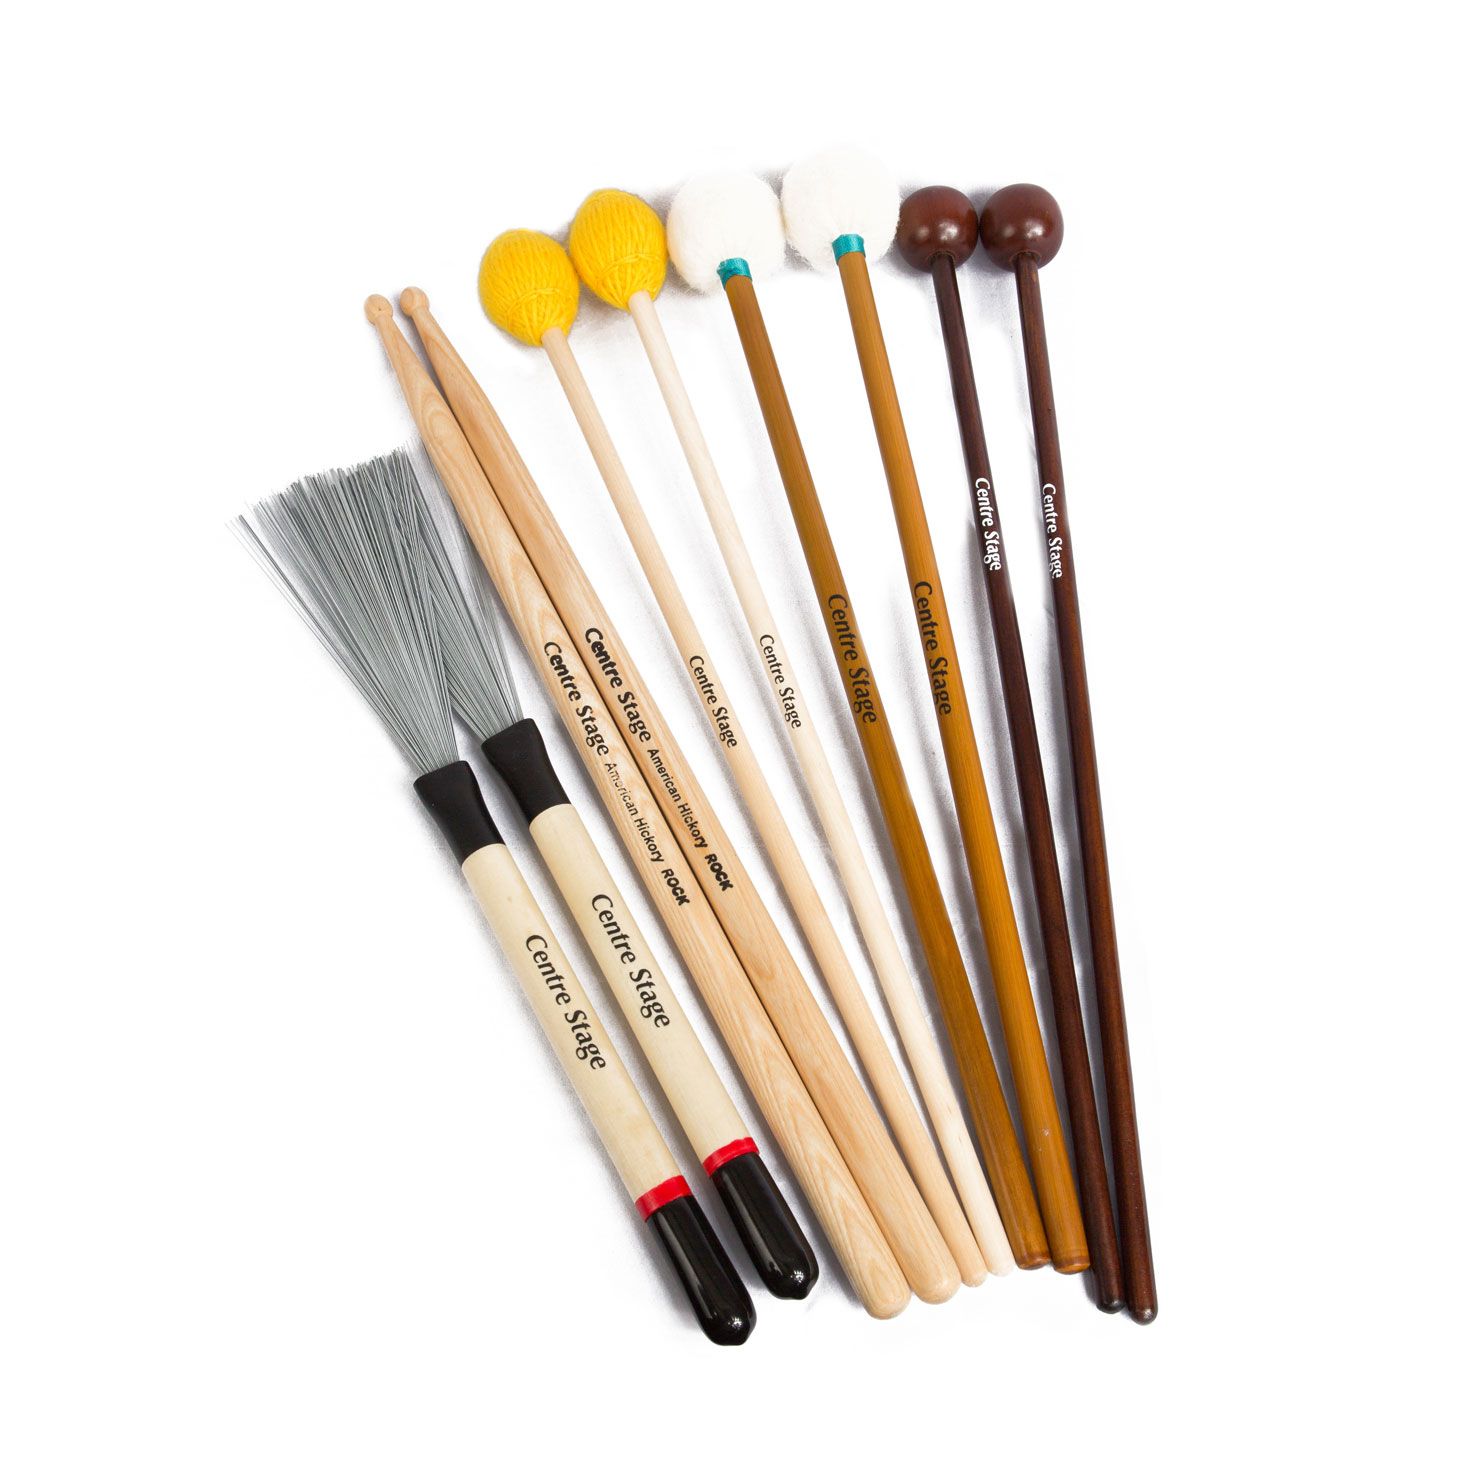 Mallets Mixed Set of Percussion Mallets